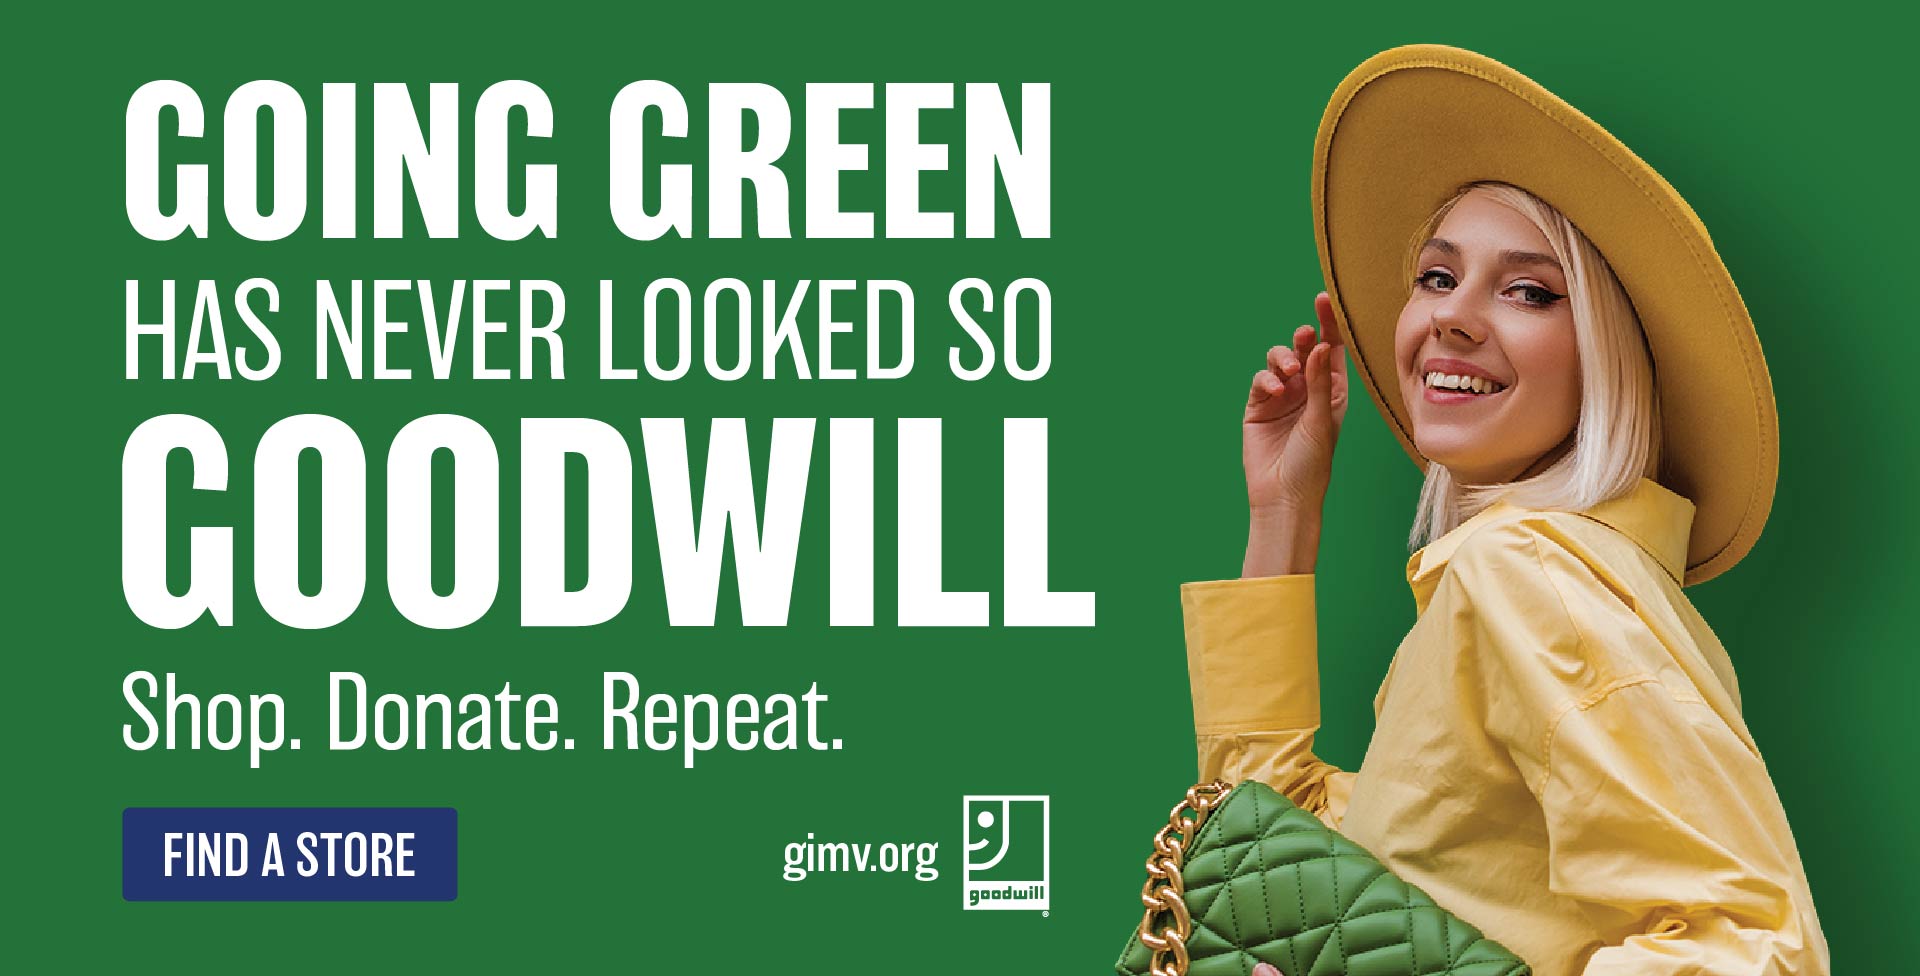 Going Green Never Looked So Goodwill